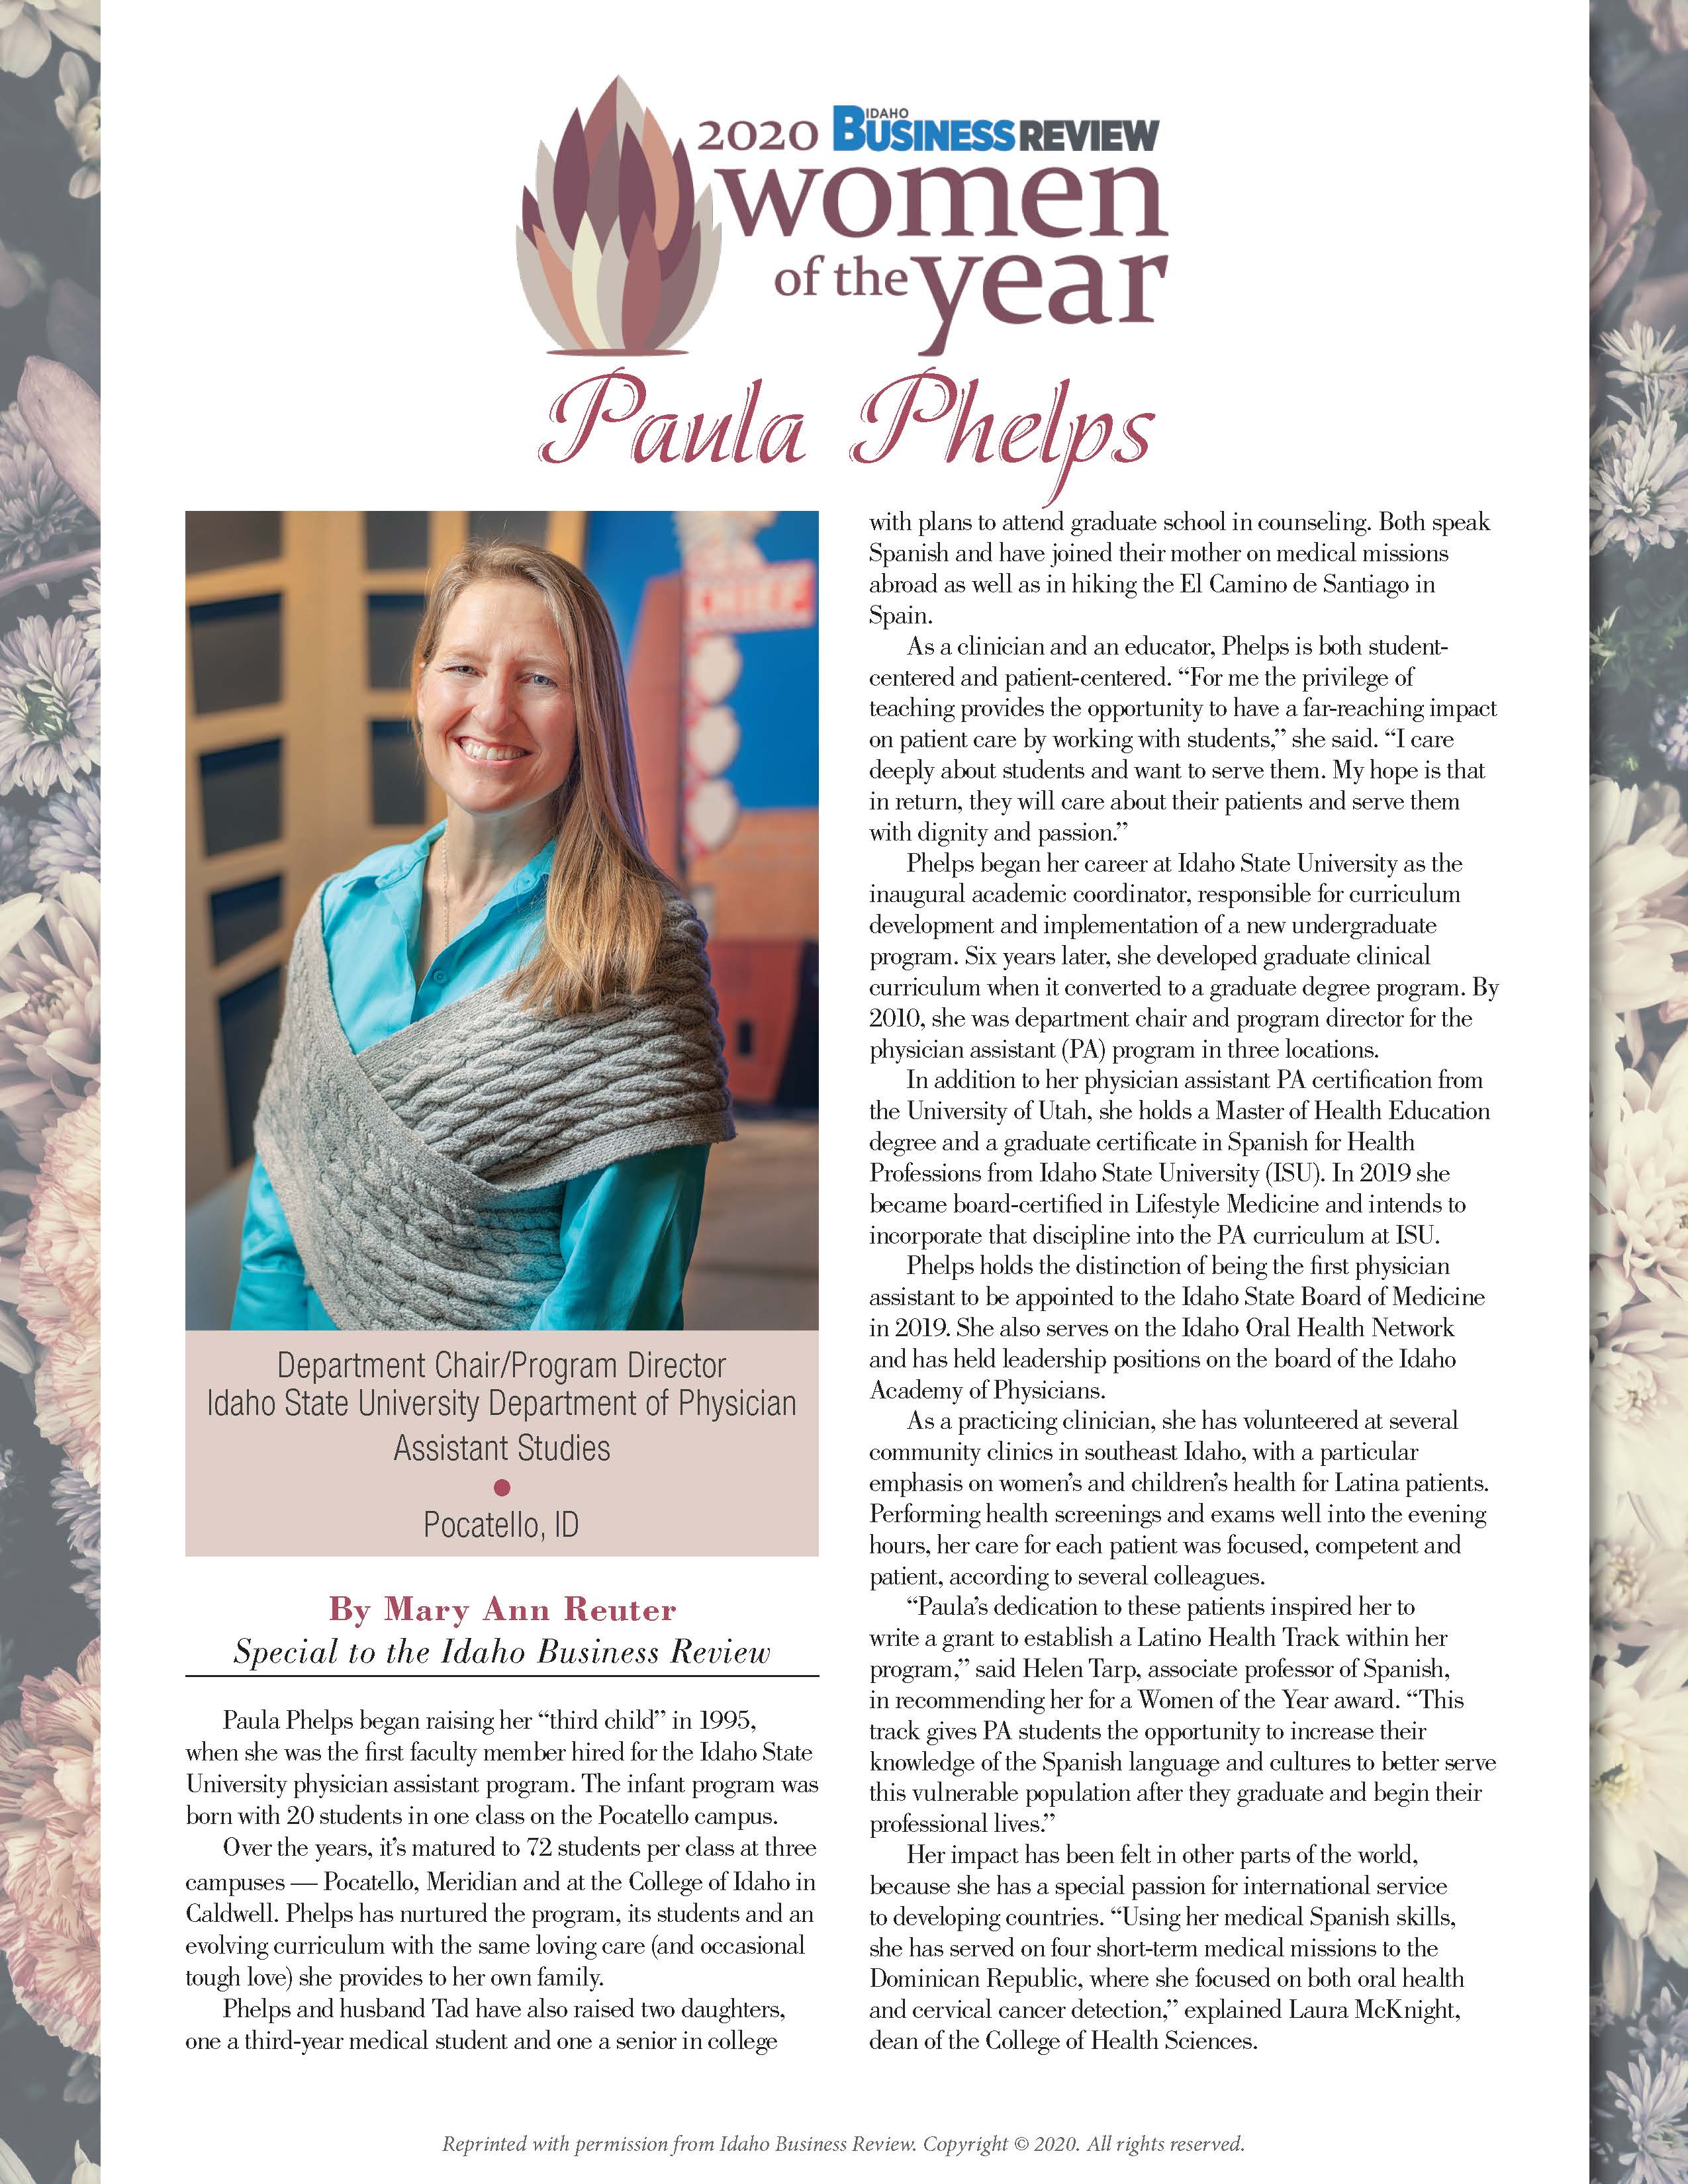 Women of the Year magazine page featuring Paula Phelps with photo and bio